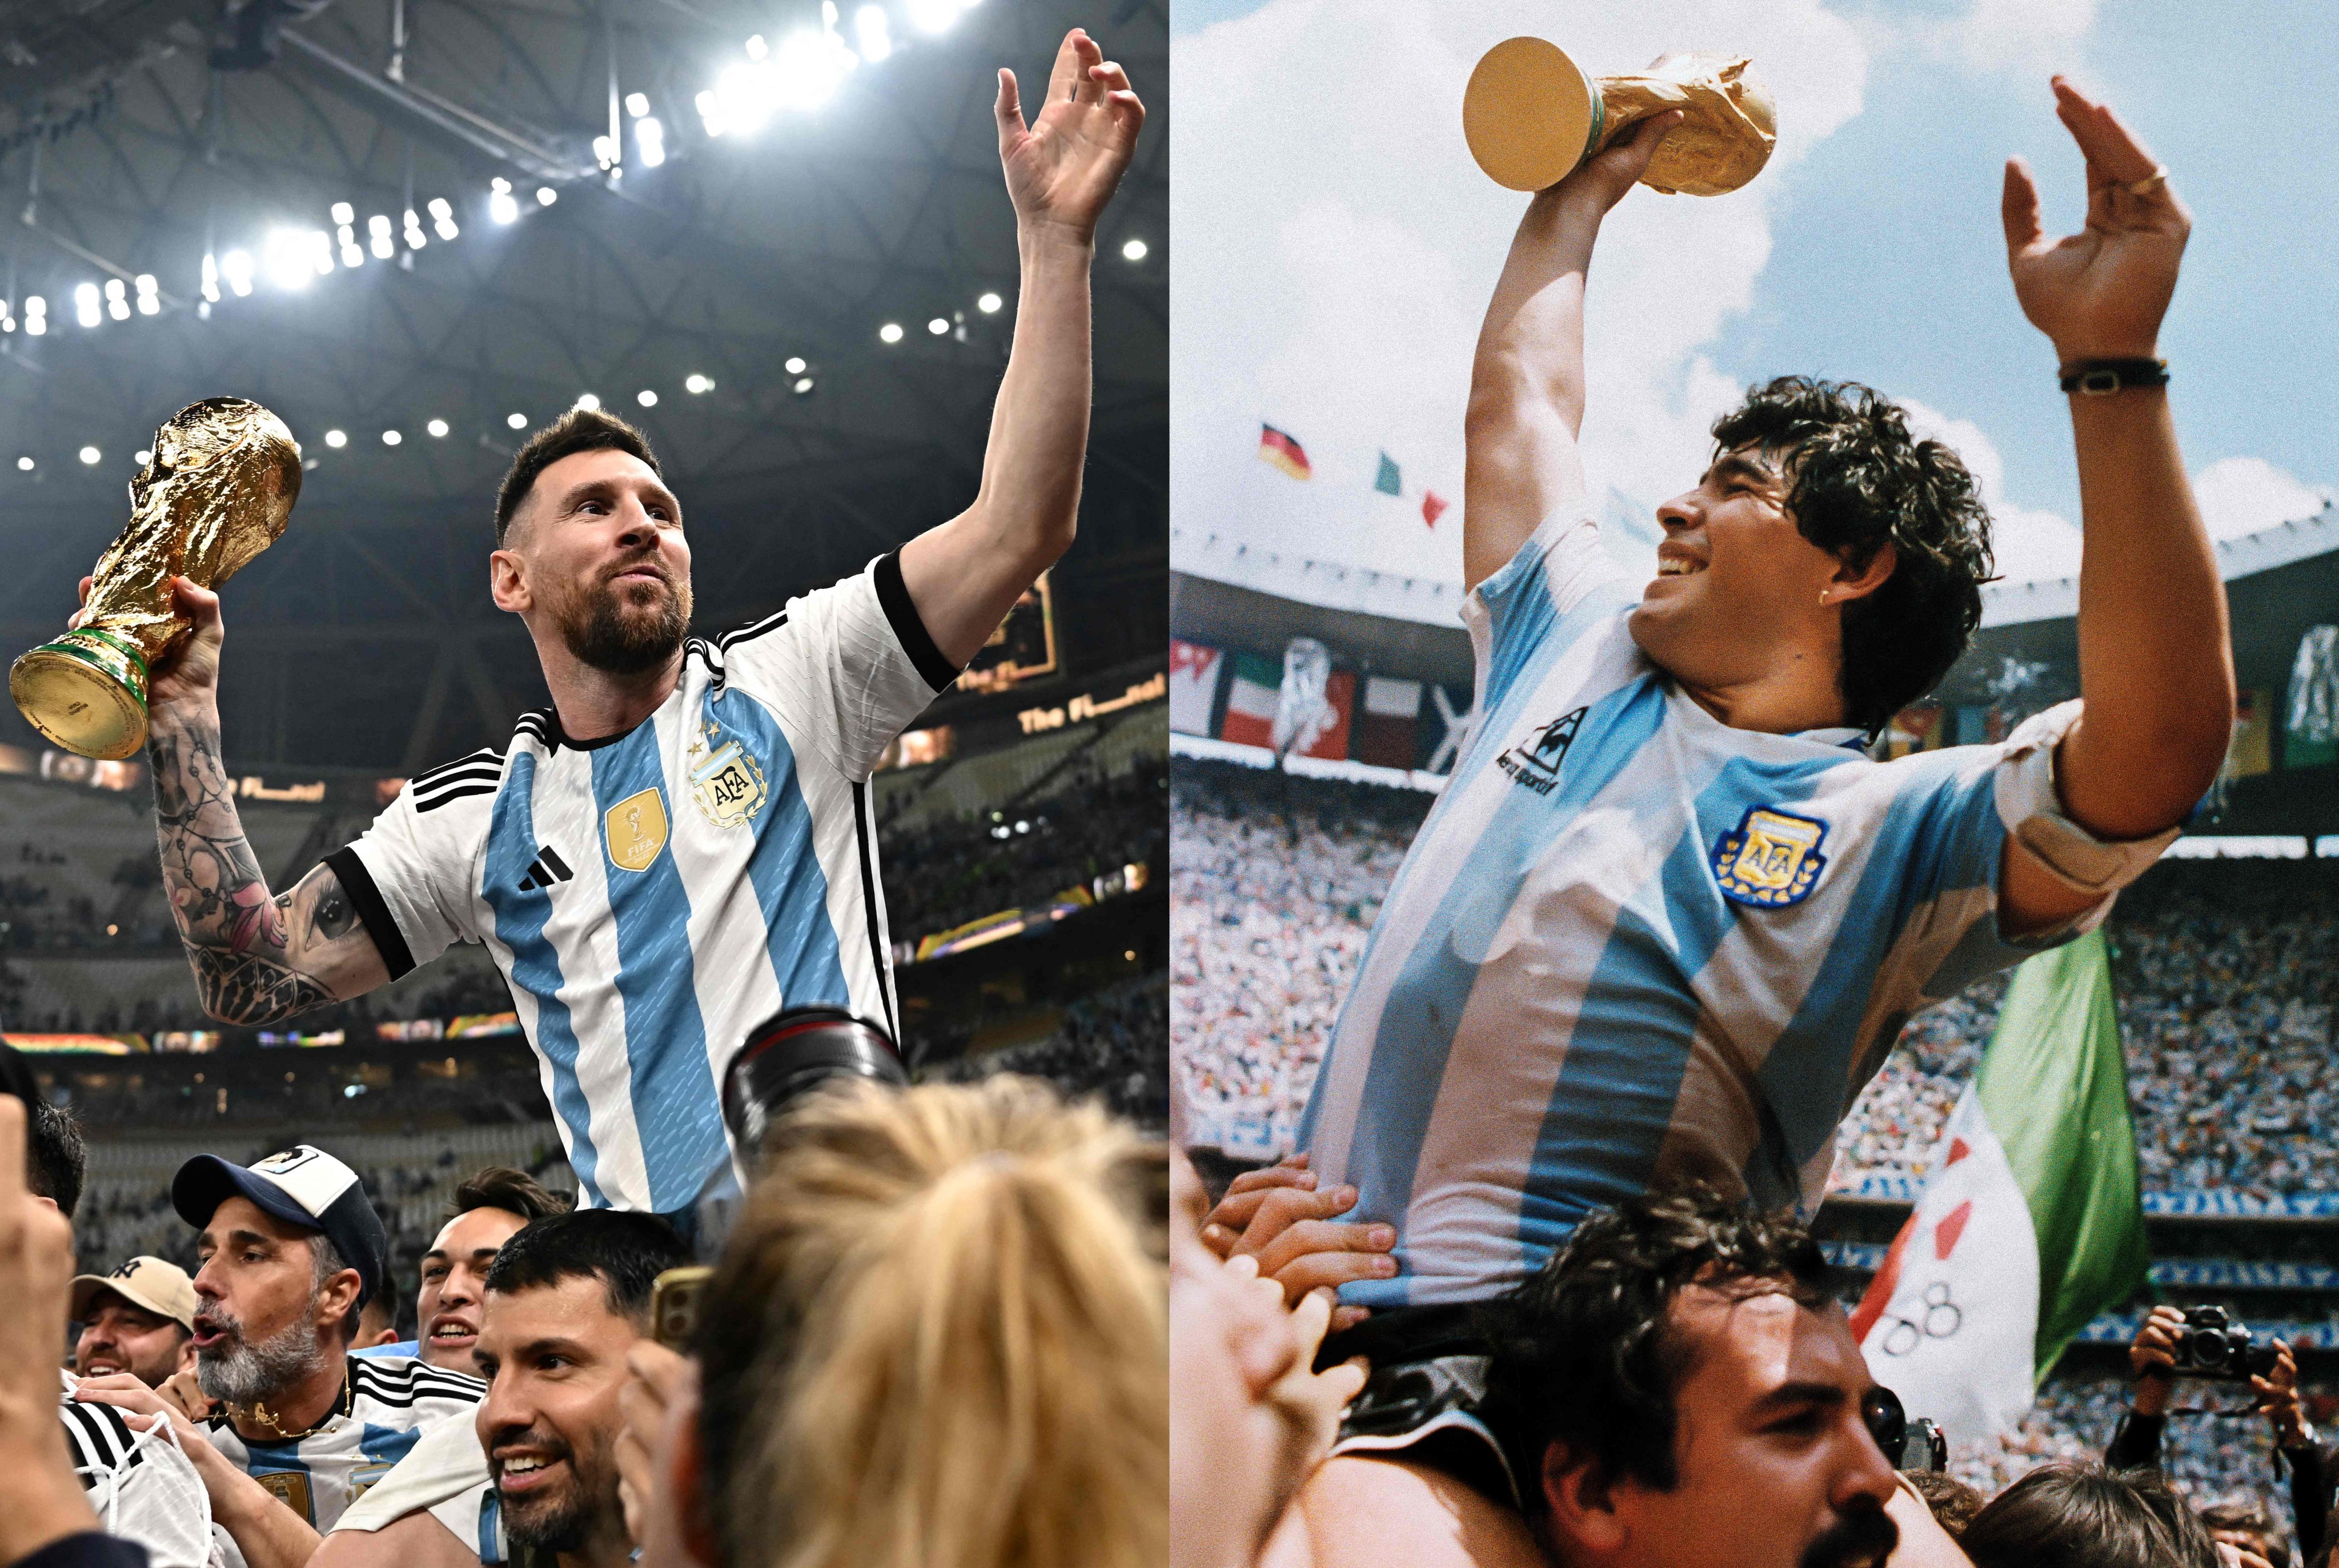 This combination of pictures shows Argentina’s forward Lionel Messi (left) holding the World Cup trophy after beating France during the Qatar 2022 World Cup final football match on Sunday and Argentina’s captain Diego Armando Maradona (right) holding the trophy won by his team after a 3-2 victory over West Germany on June 29, 1986 at the Azteca Stadium in Mexico City. Photo: AFP